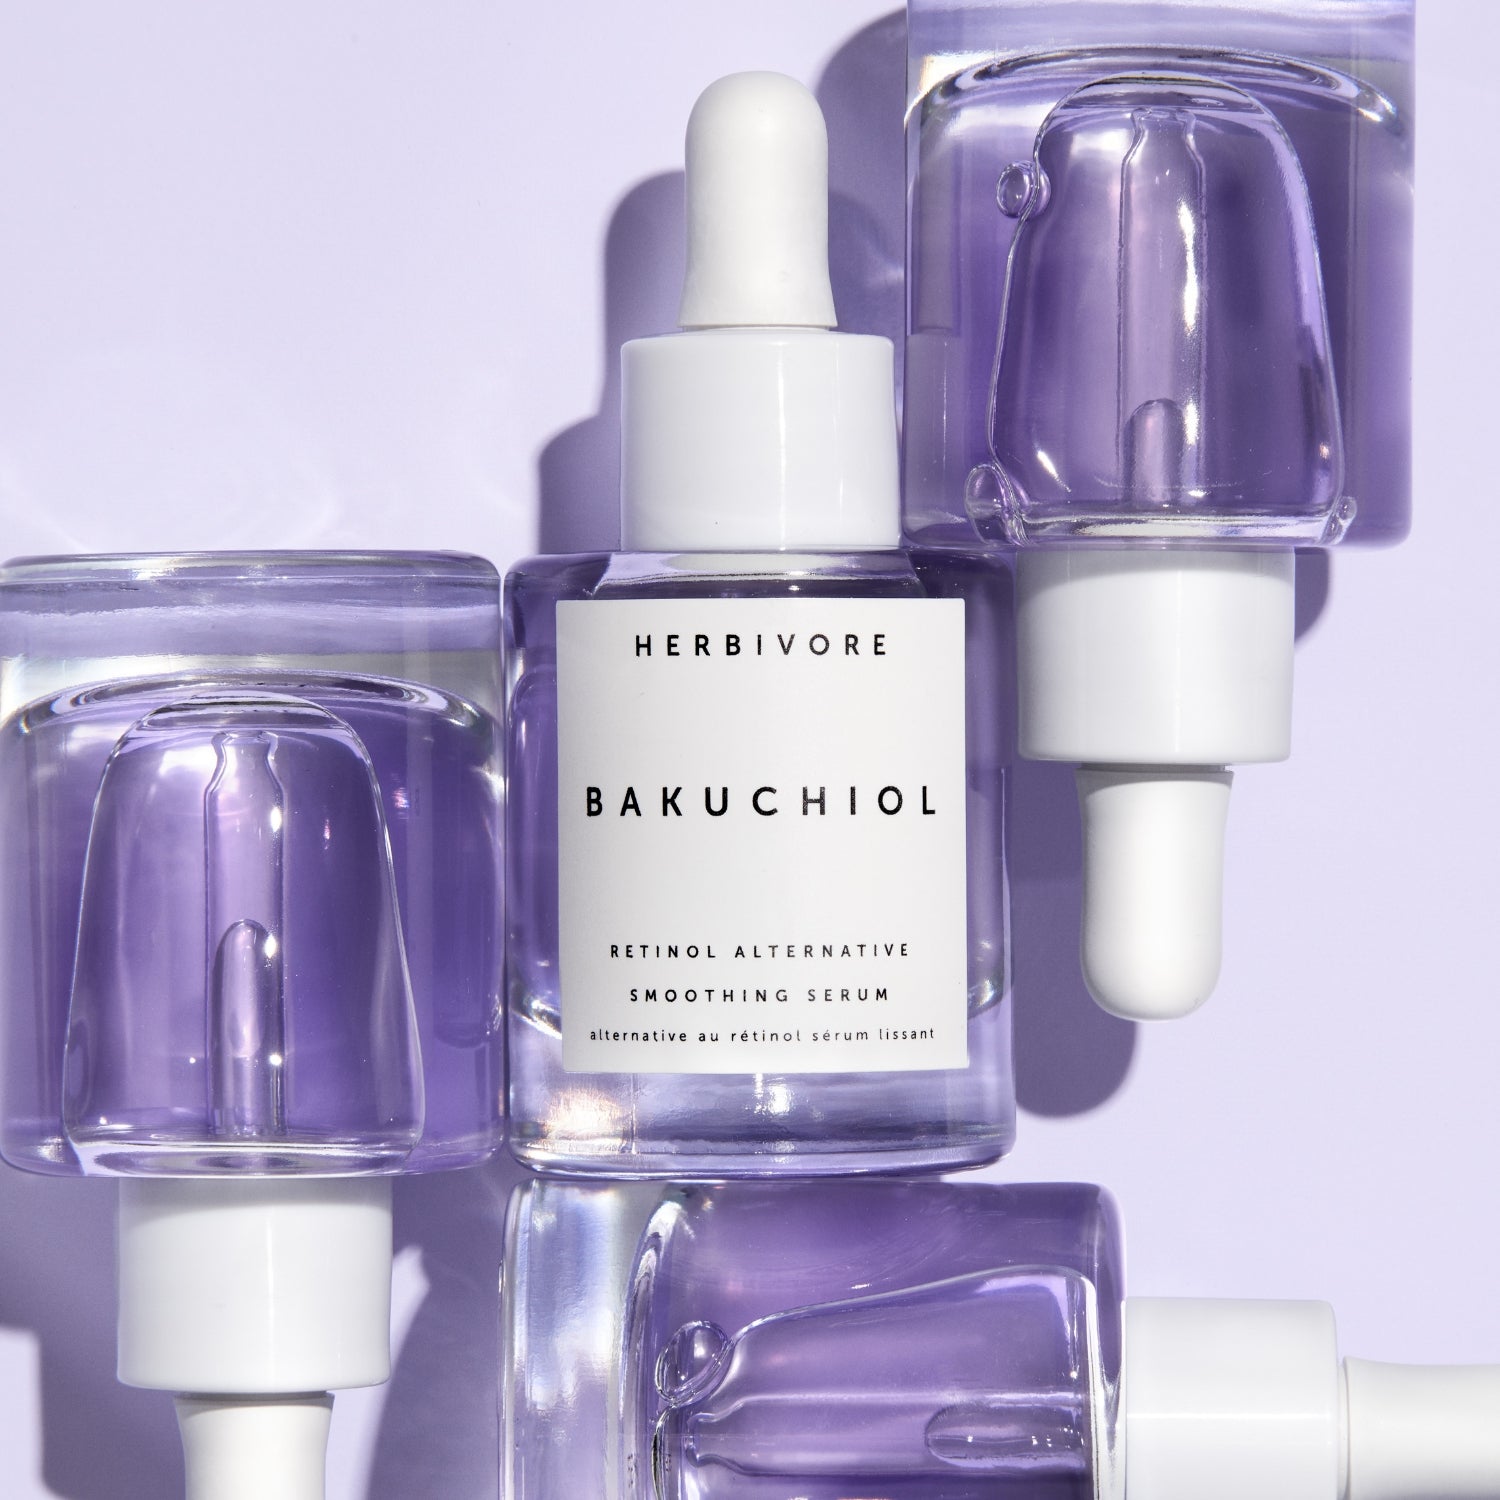 Close-up of multiple clear Bakuchiol Retinol Alternative Smoothing Serums with purple serum visible